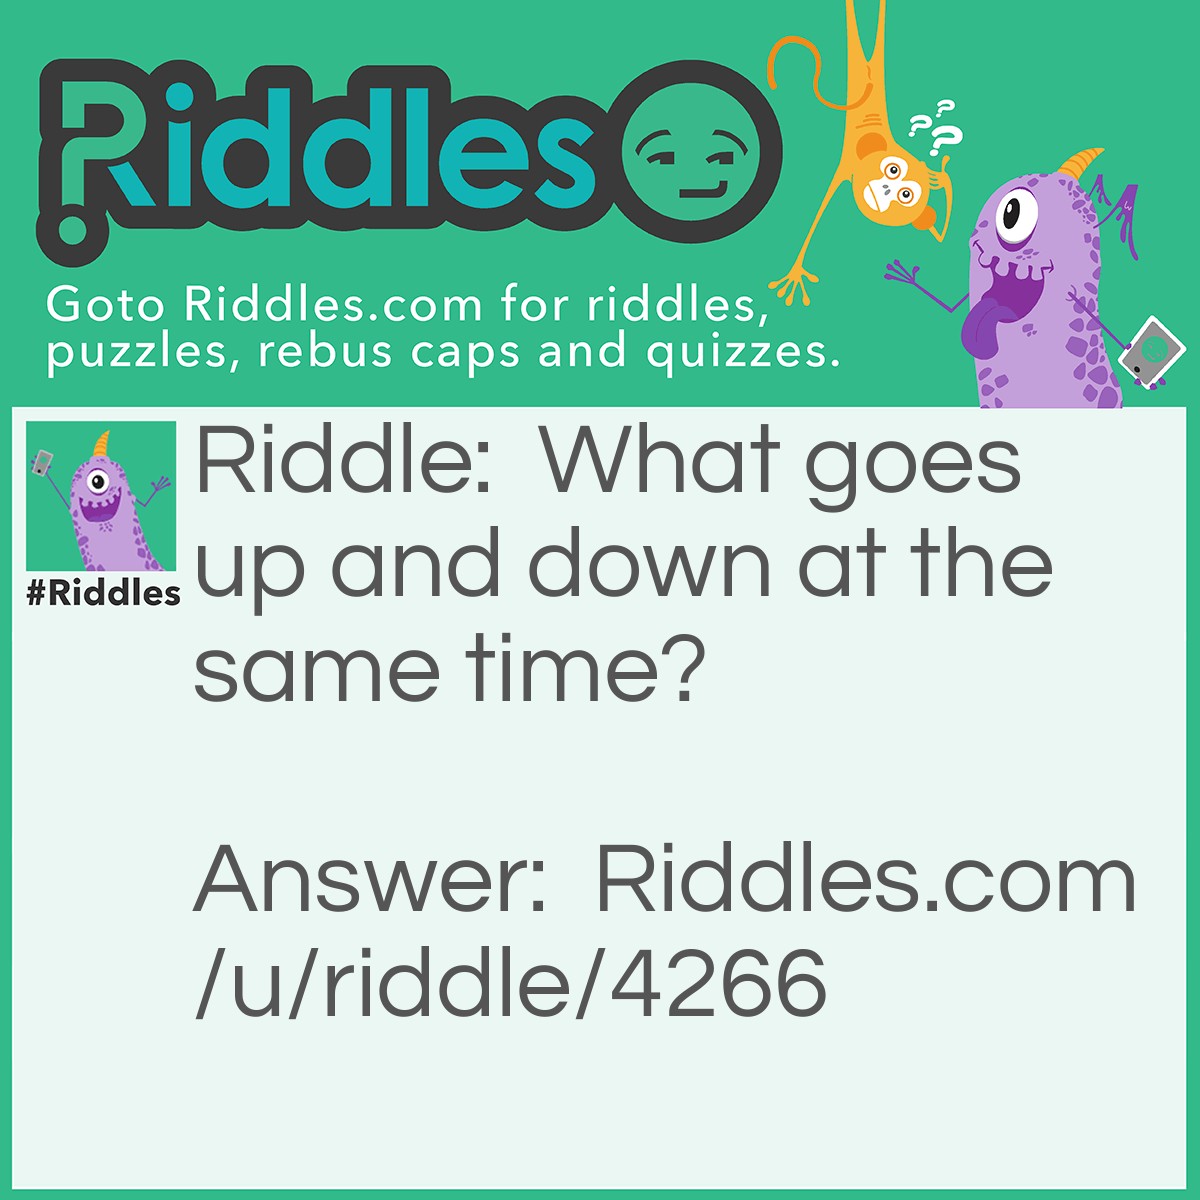 Riddle: What goes up and down at the same time? Answer: Stairs.